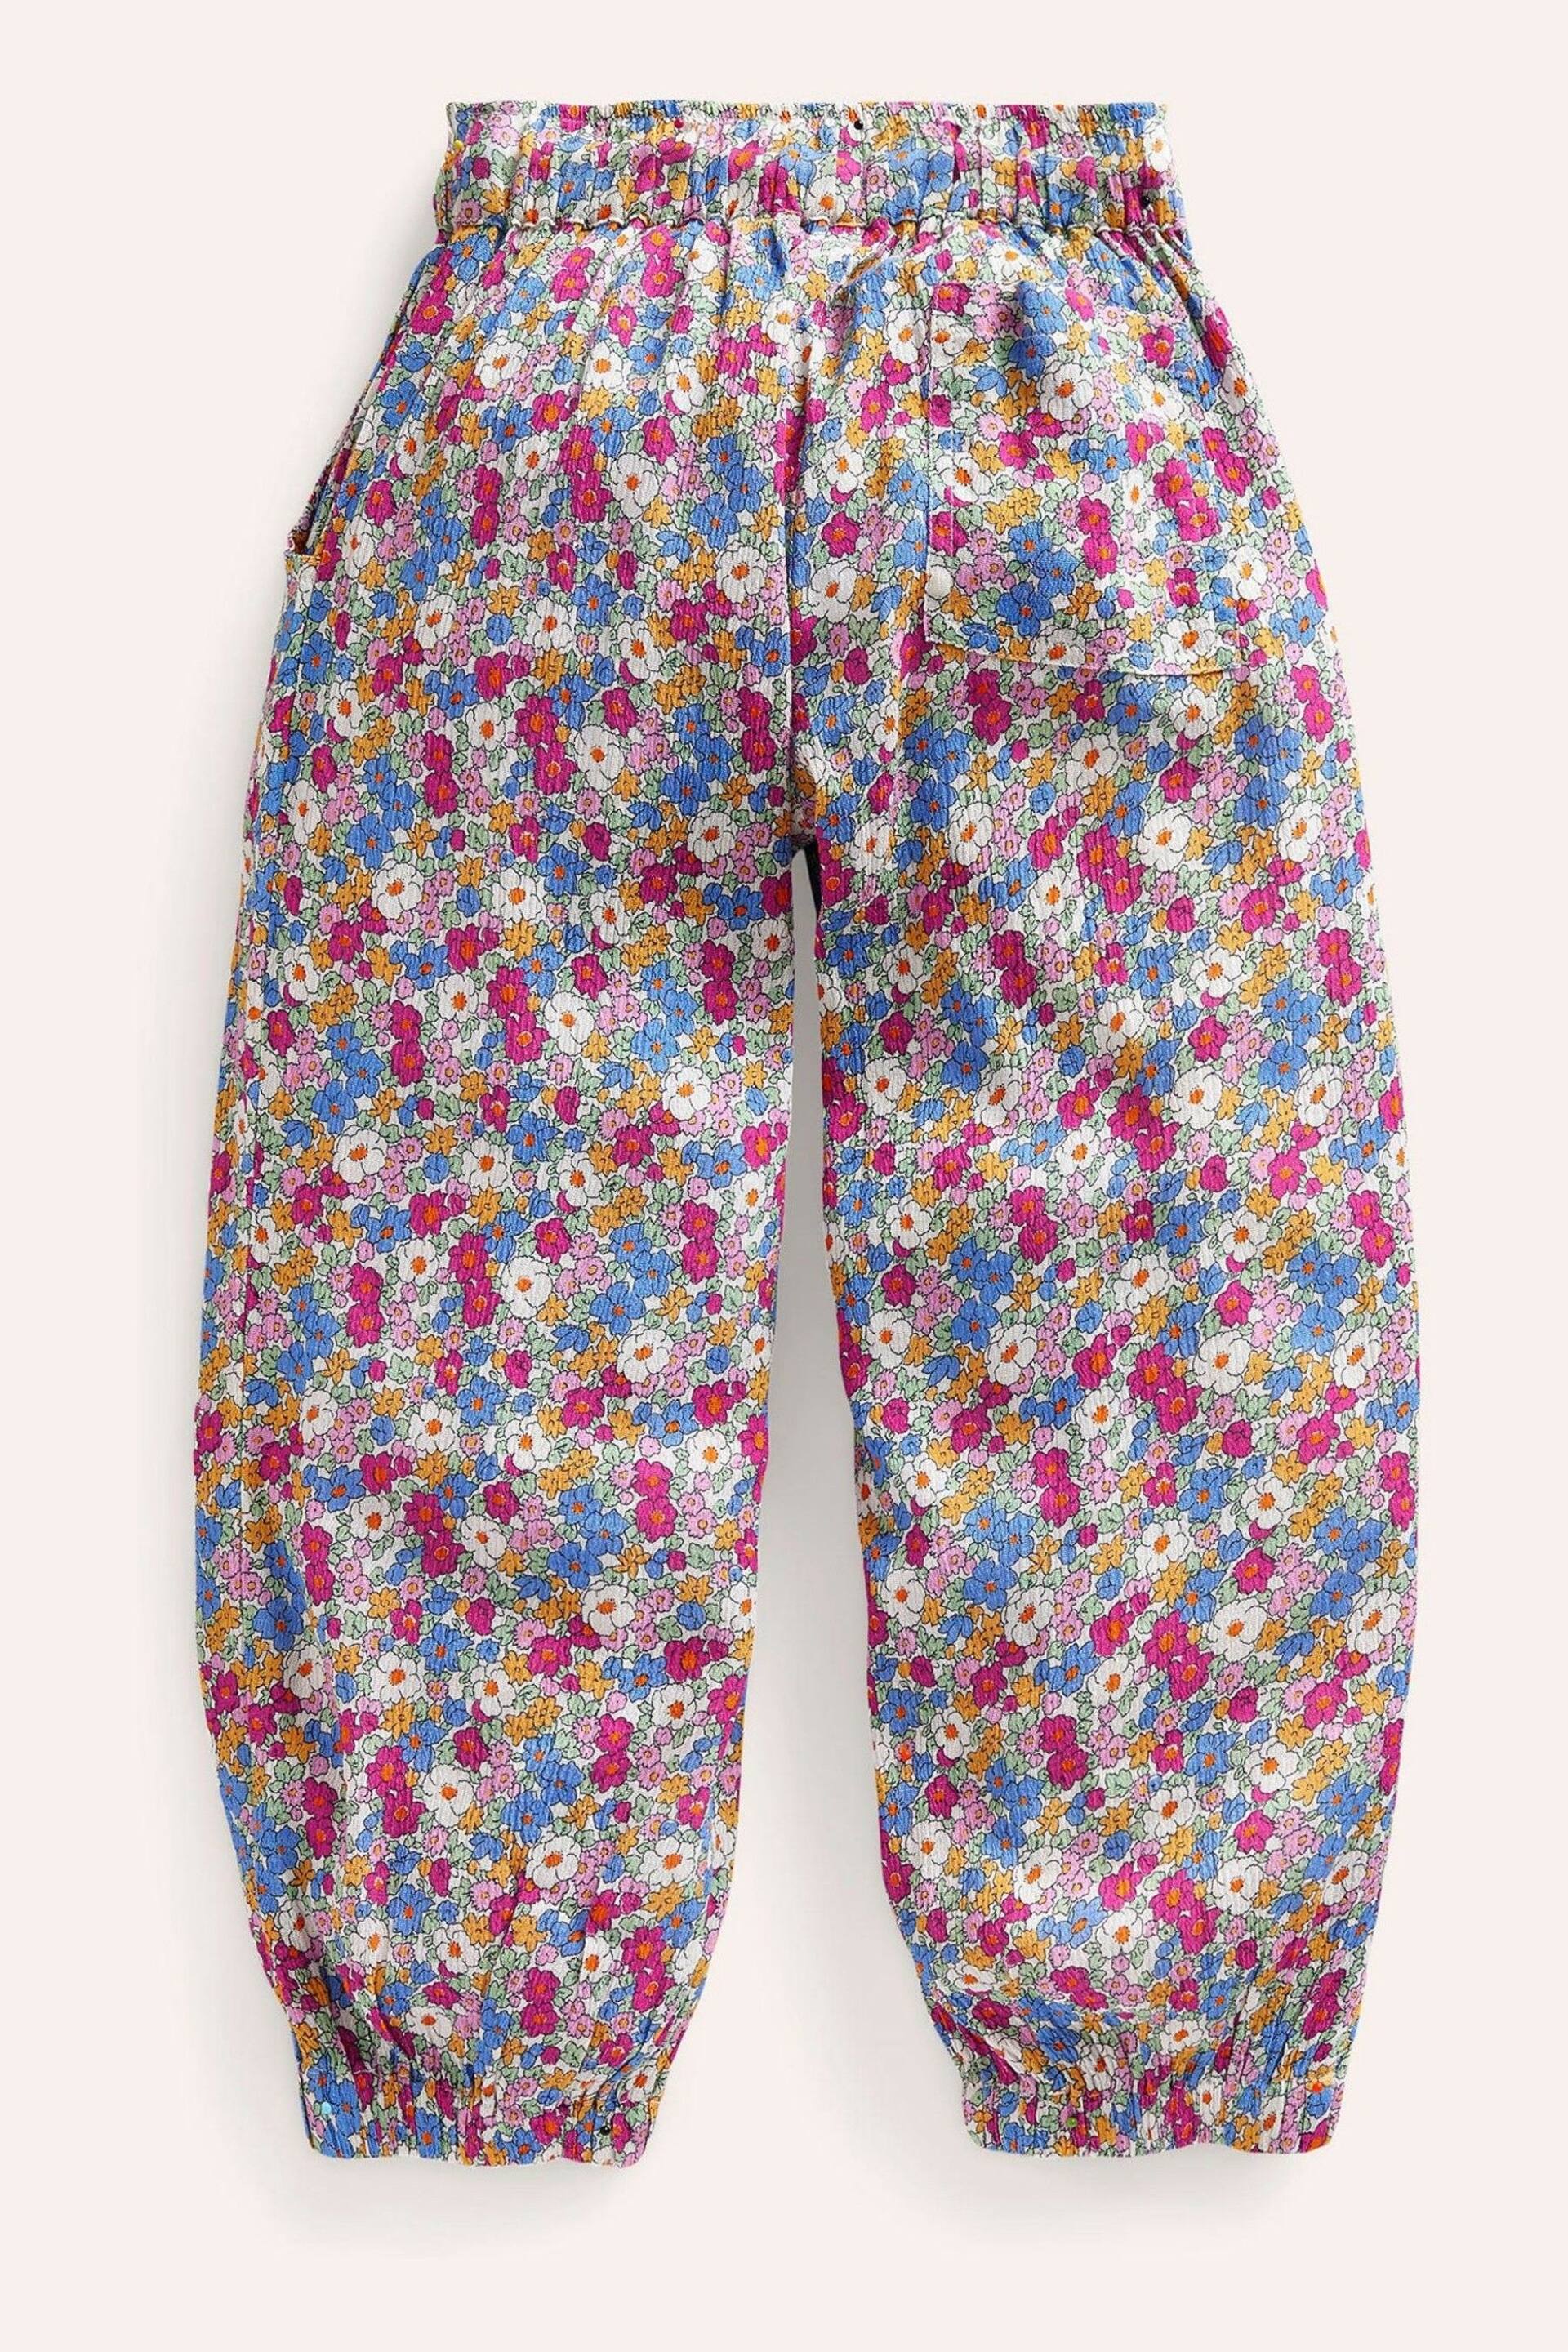 Boden Pink Tapered Holiday Trousers - Image 2 of 3